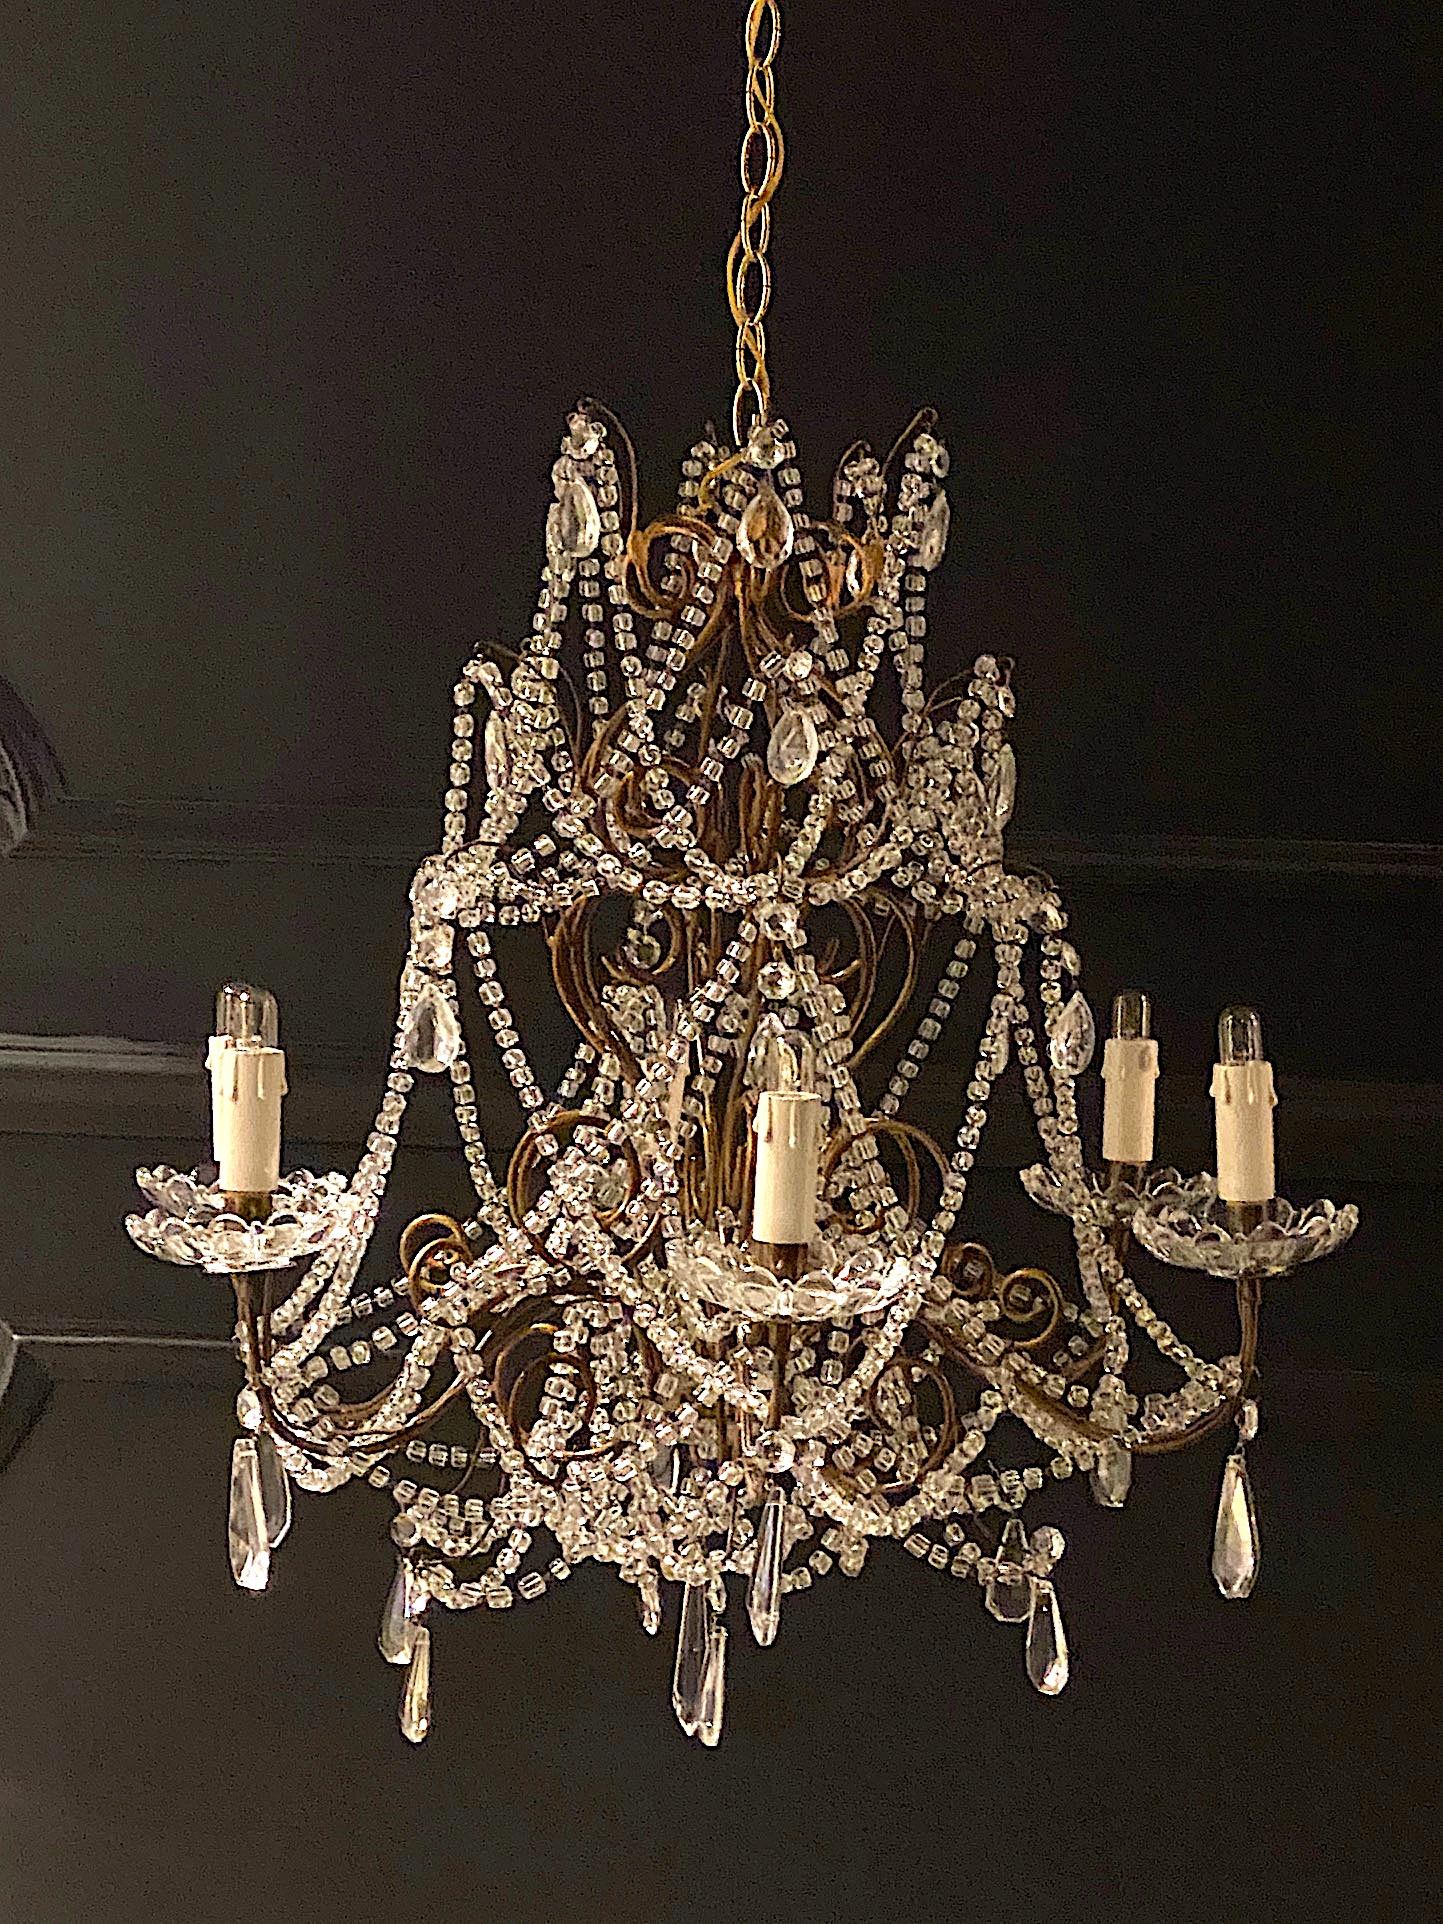 A charming Italian 1950s Hollywood Regency style gilt iron and glass bead and crystal chandelier. The body of the chandelier measures 24 inches in diameter and 24 inches high. There are six arms with candelabra sockets and scallop glass bobeches.